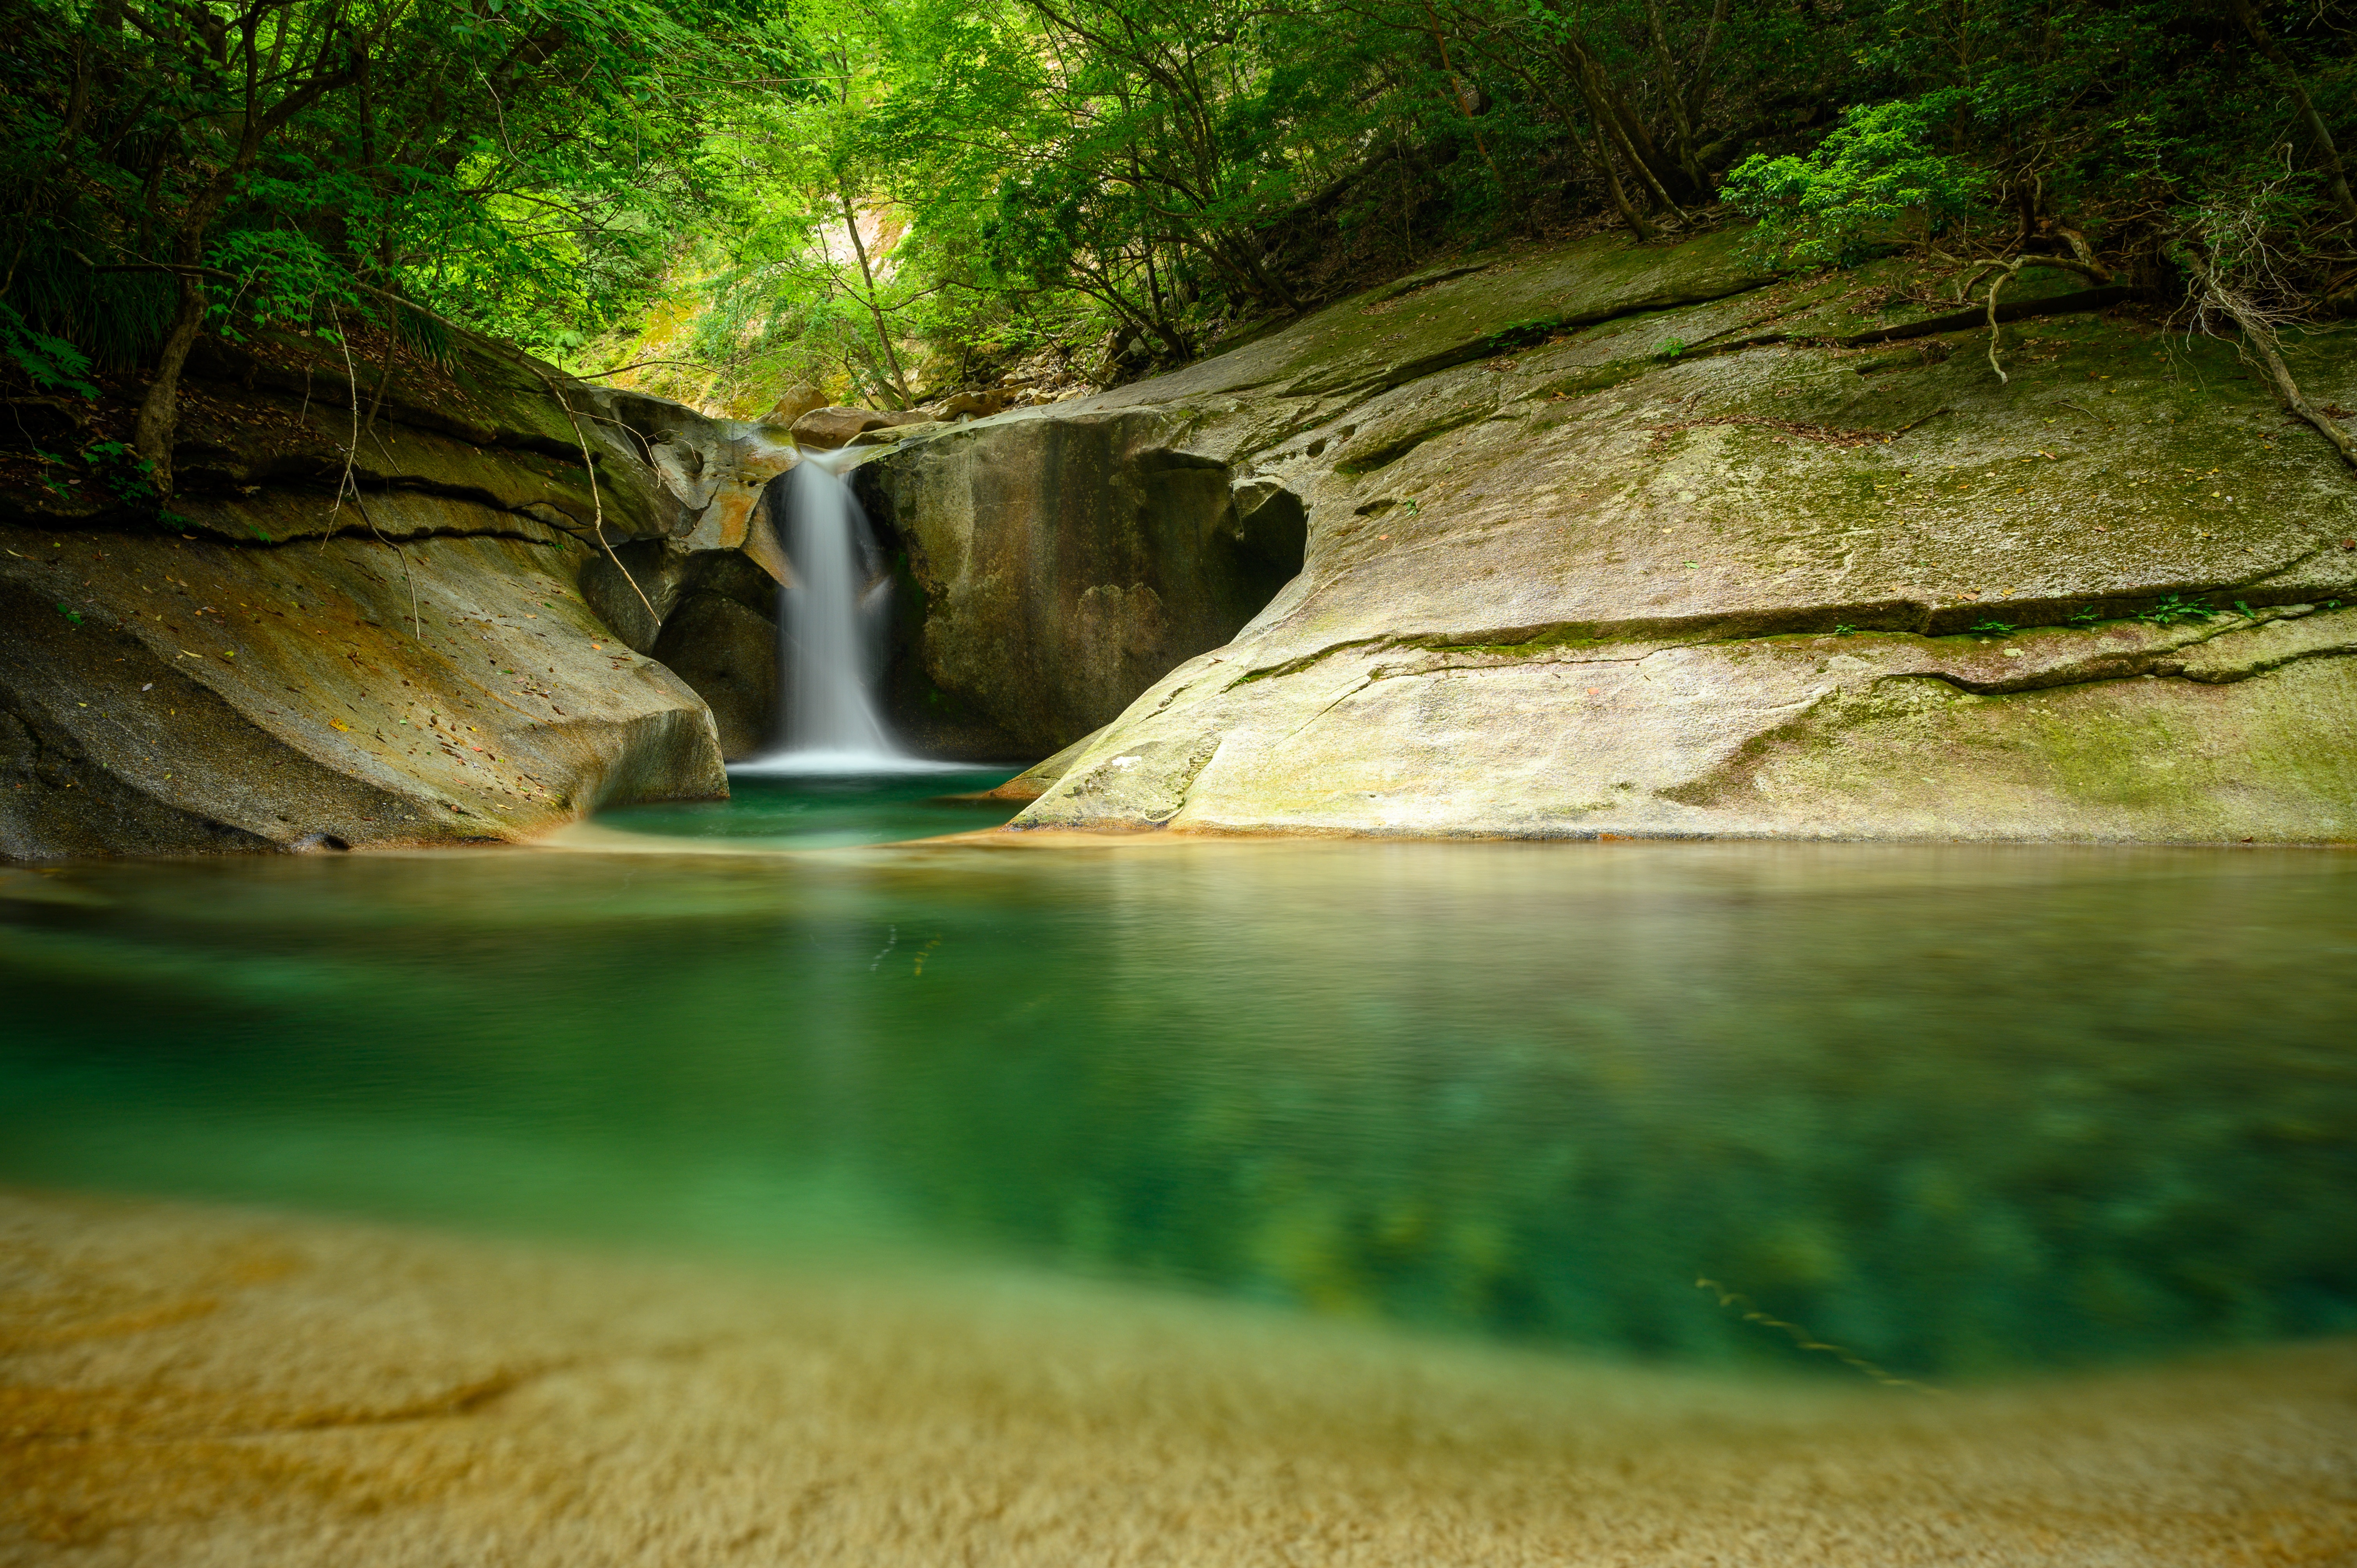 139659 download wallpaper water, stone, nature, trees, waterfall, forest, break, precipice screensavers and pictures for free